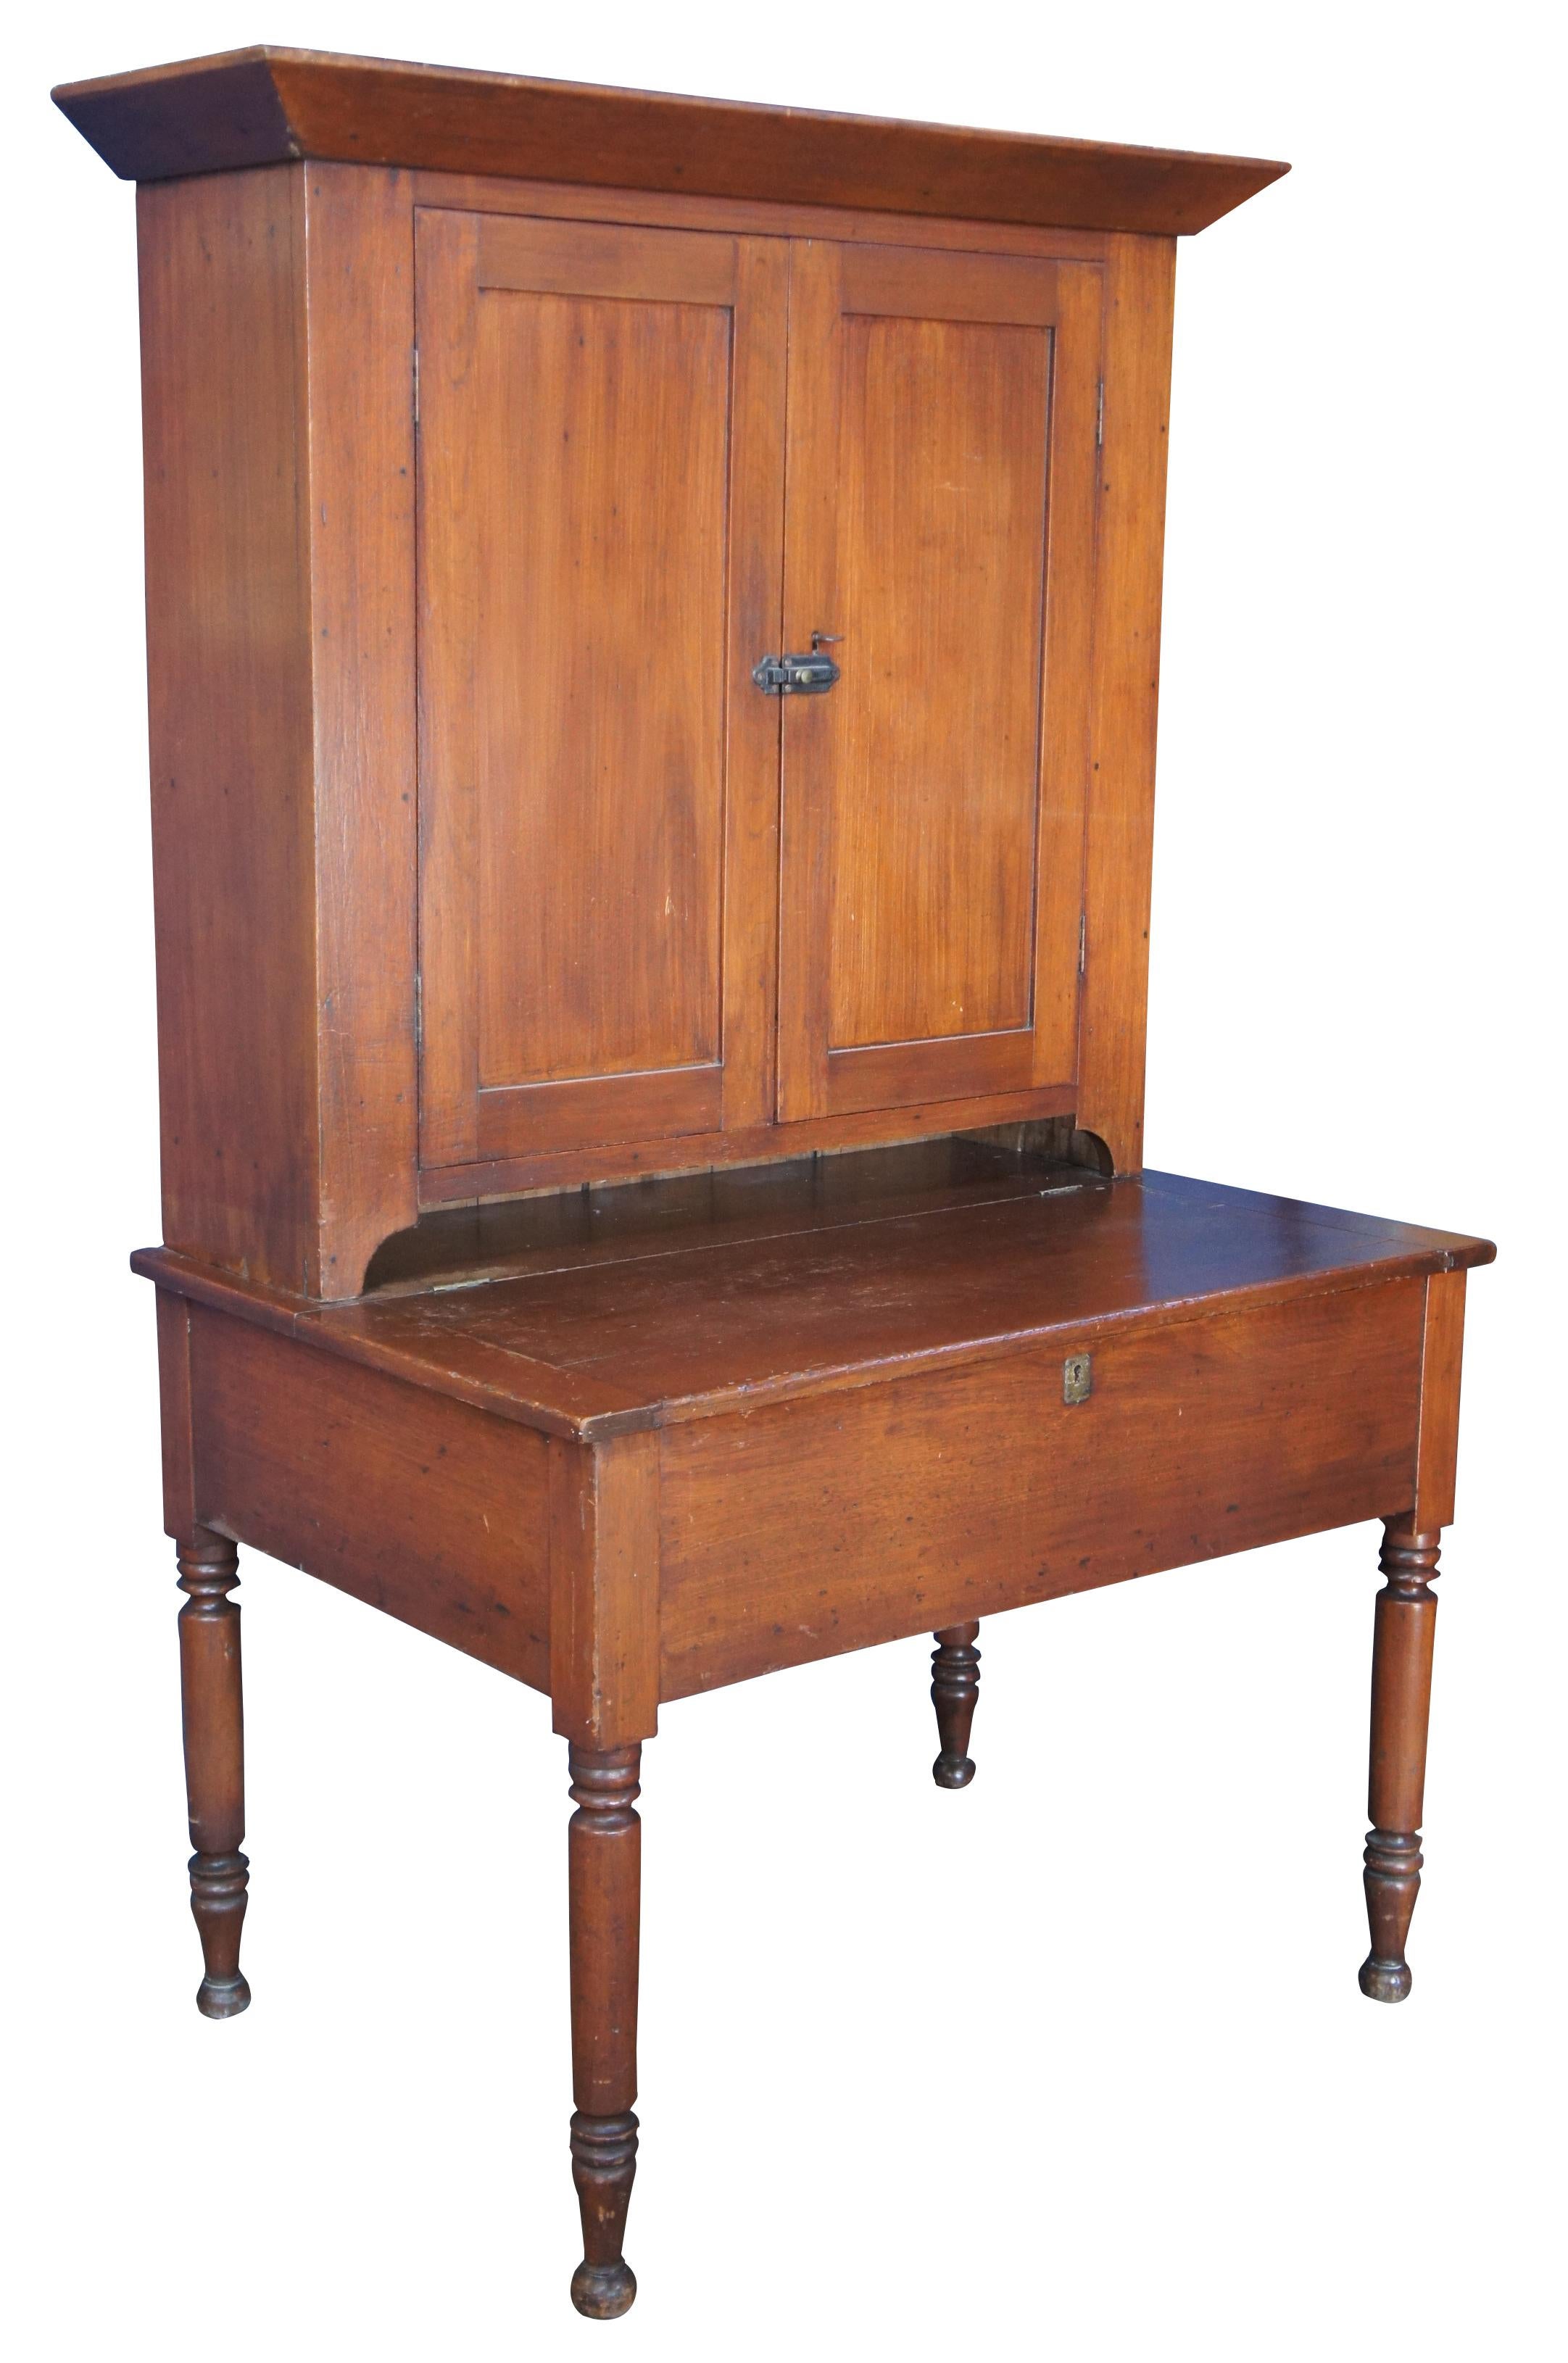 A beautiful plantation or secretary desk featuring primitive styling with upper cabinet or bookcase and lower flip top desk over turned legs. Made from poplar and walnut; first half 19th century.
 